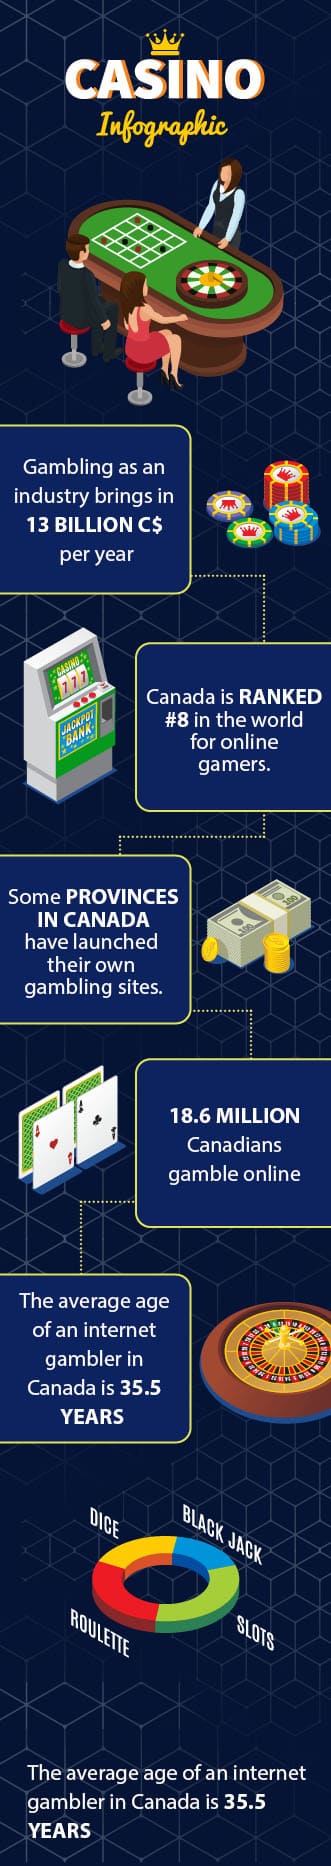 Gambling facts infographic in Canada